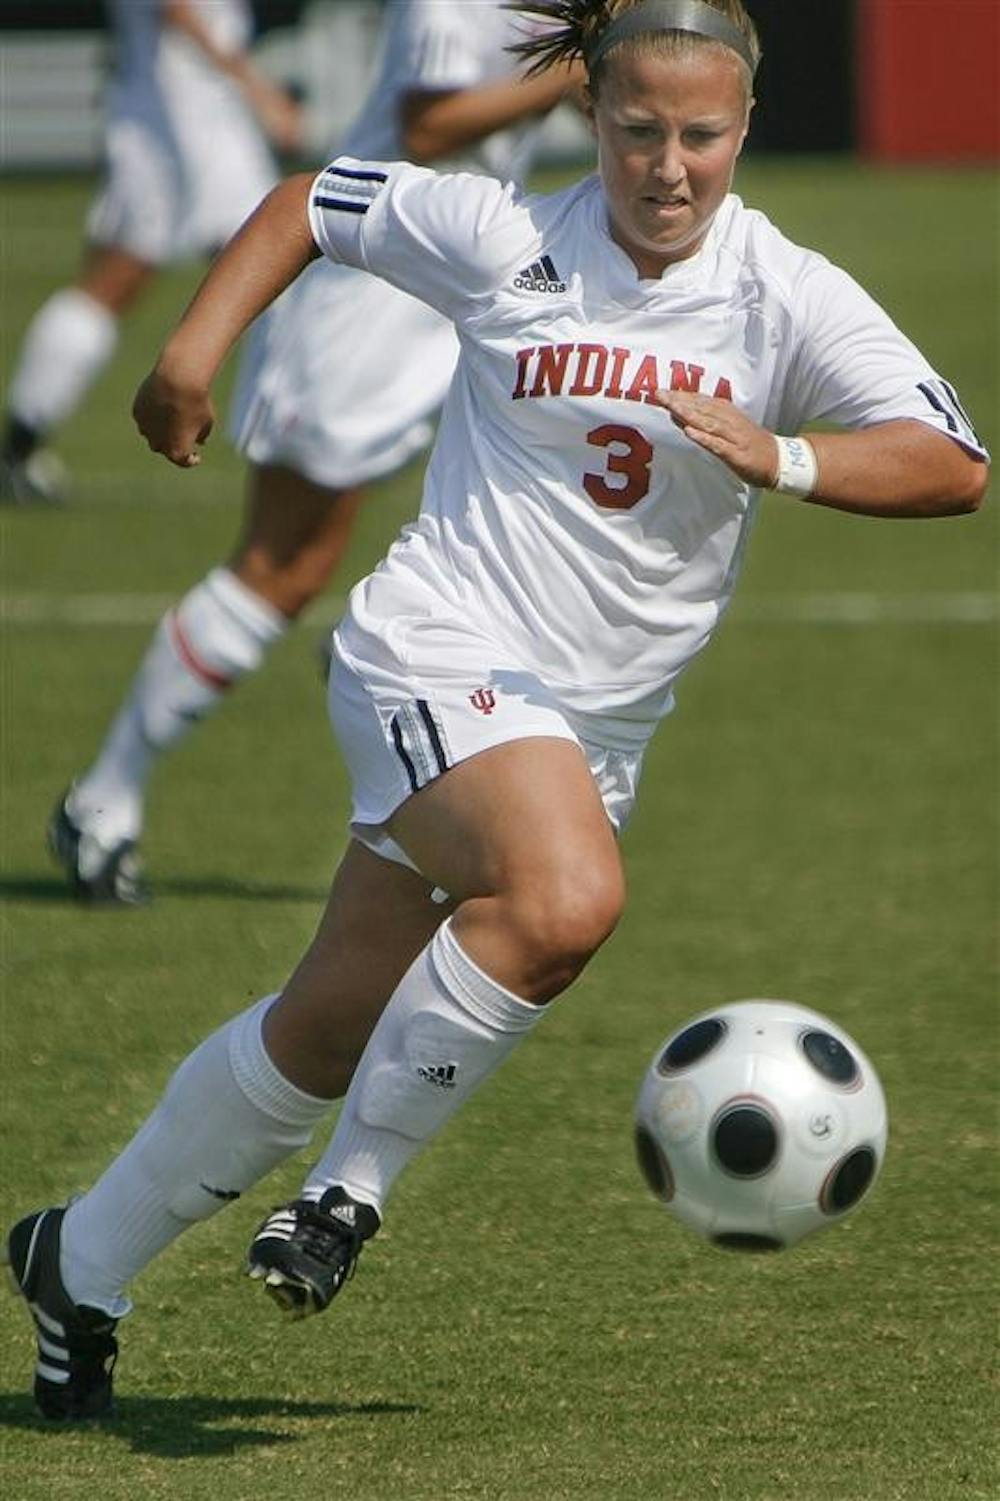 Sophomore midfielder Chloe McKay moves the ball downfield during the Hoosiers 1-0 loss to Ohio State Sunday afternoon at Bill Armstrong Stadium.